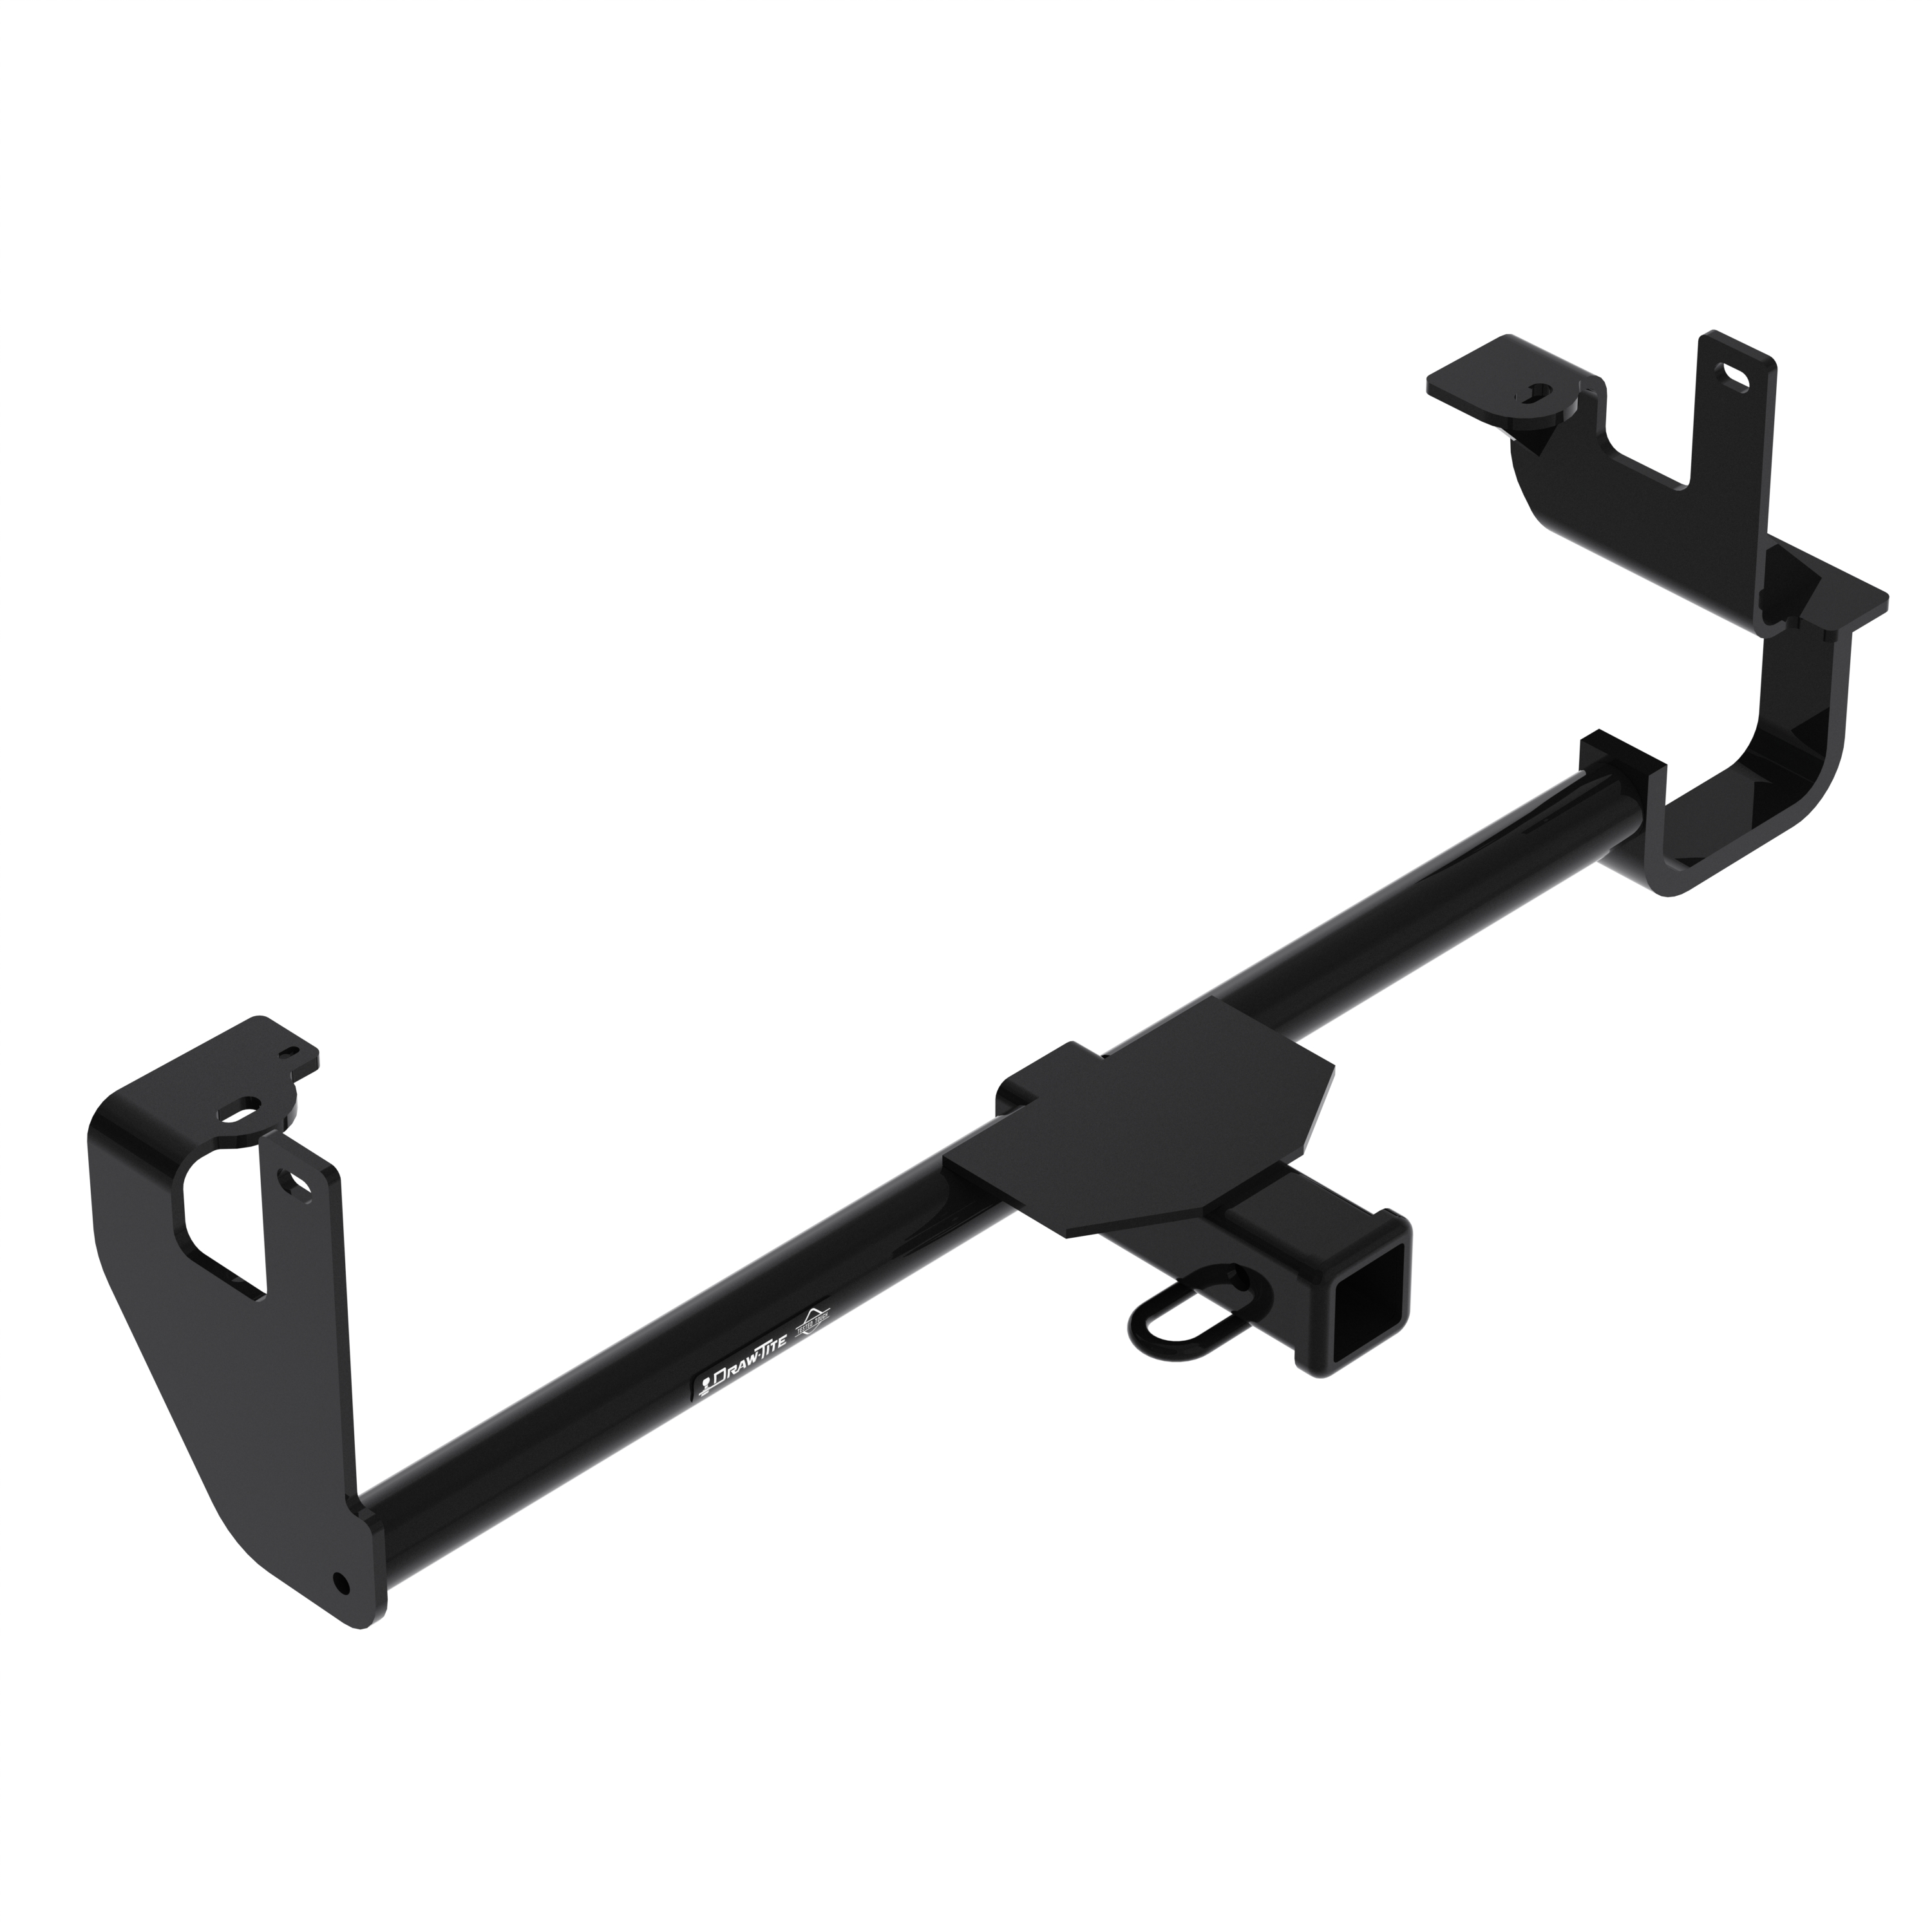 Draw Tite 76549 Max-Frame Trailer Hitches Class III 2" (2000 lbs GTW/300 lbs TW) Lexus UX250h 19-22